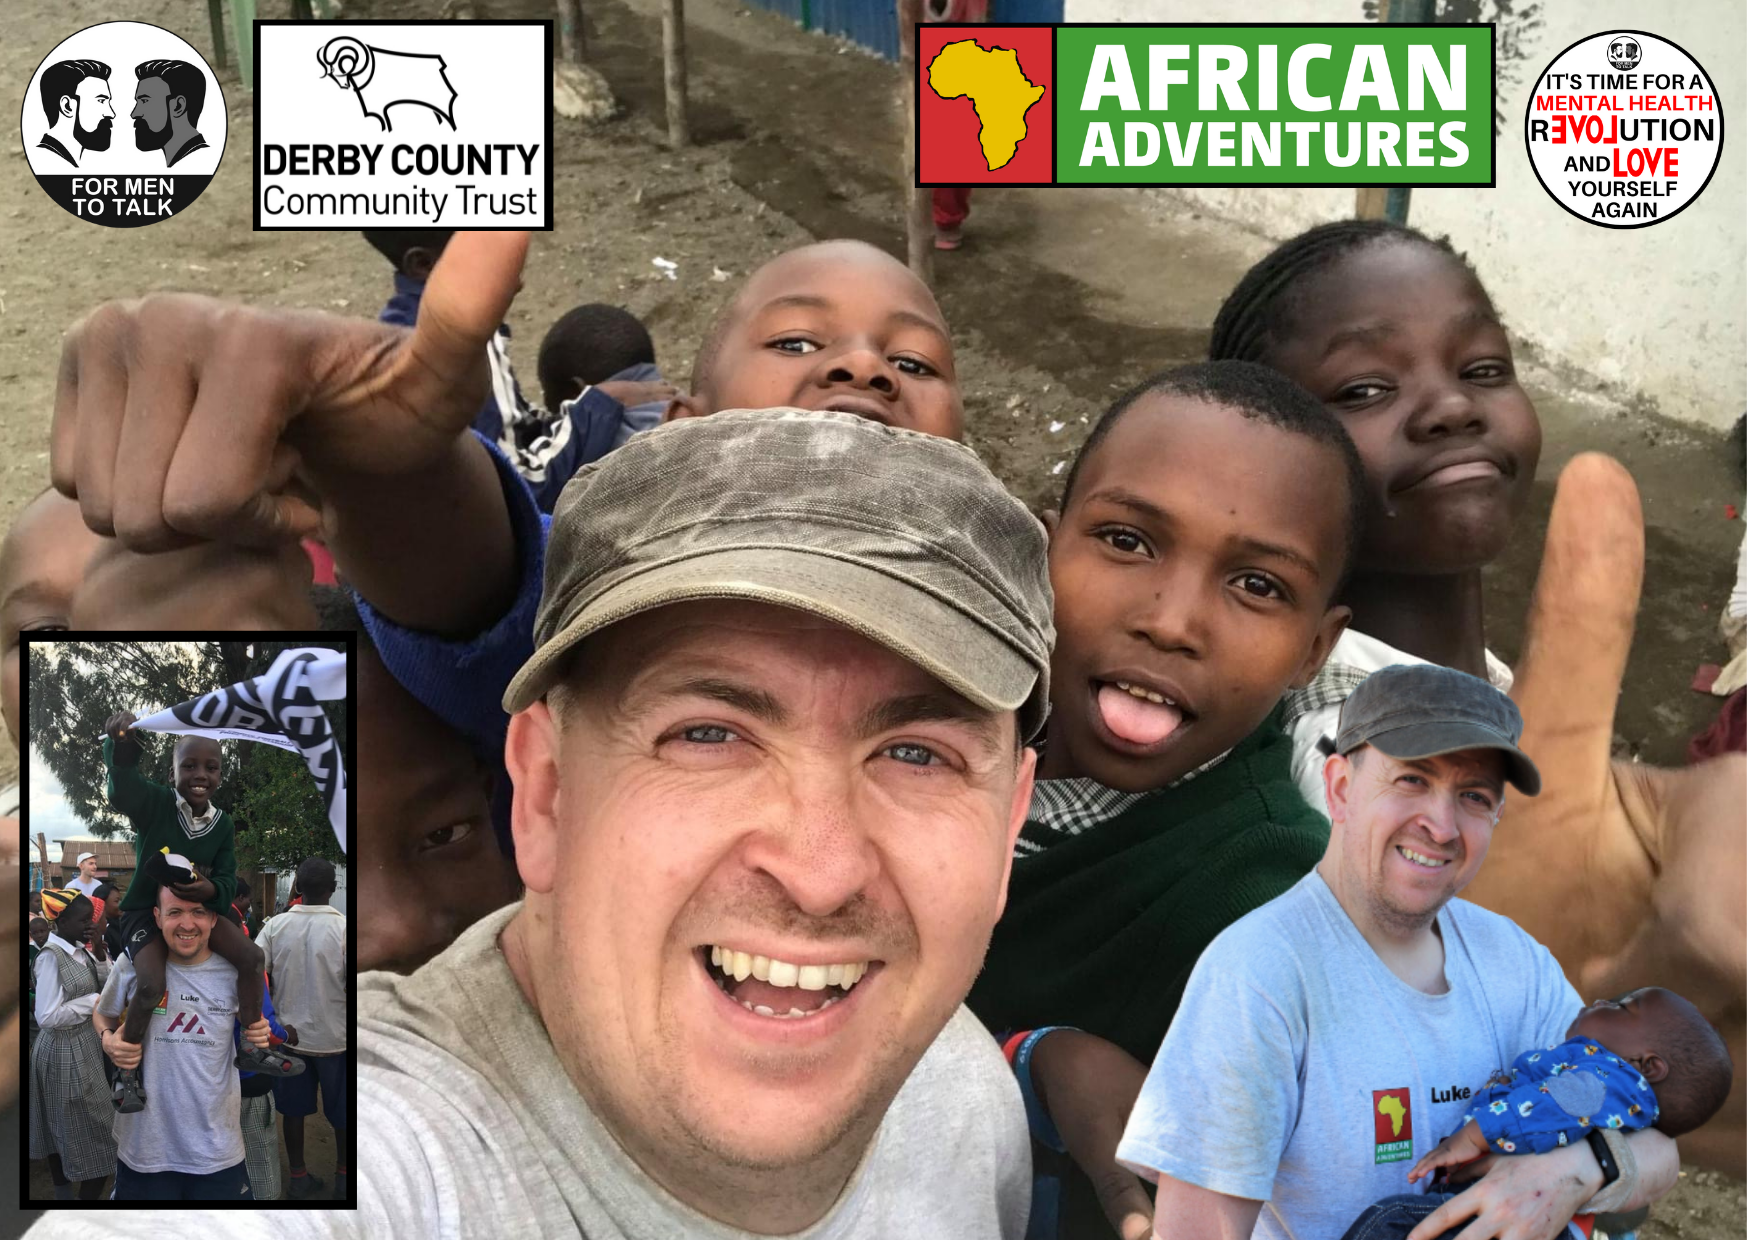 Can you help ‘For Men To Talk’ founder broadcast Live from Kenya?